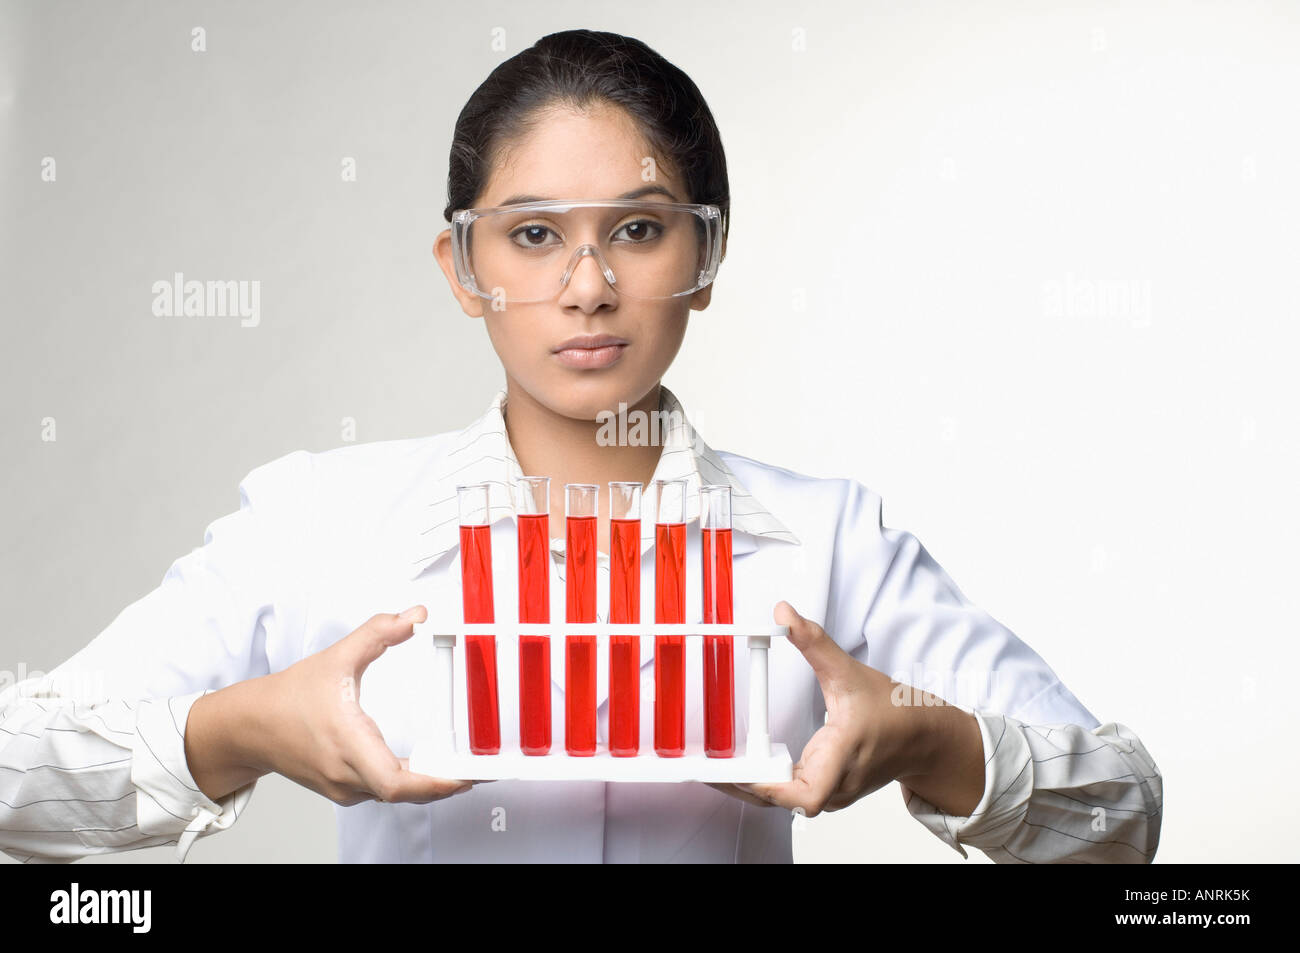 Portrait of a female lab technician holding a test tube rack Stock Photo